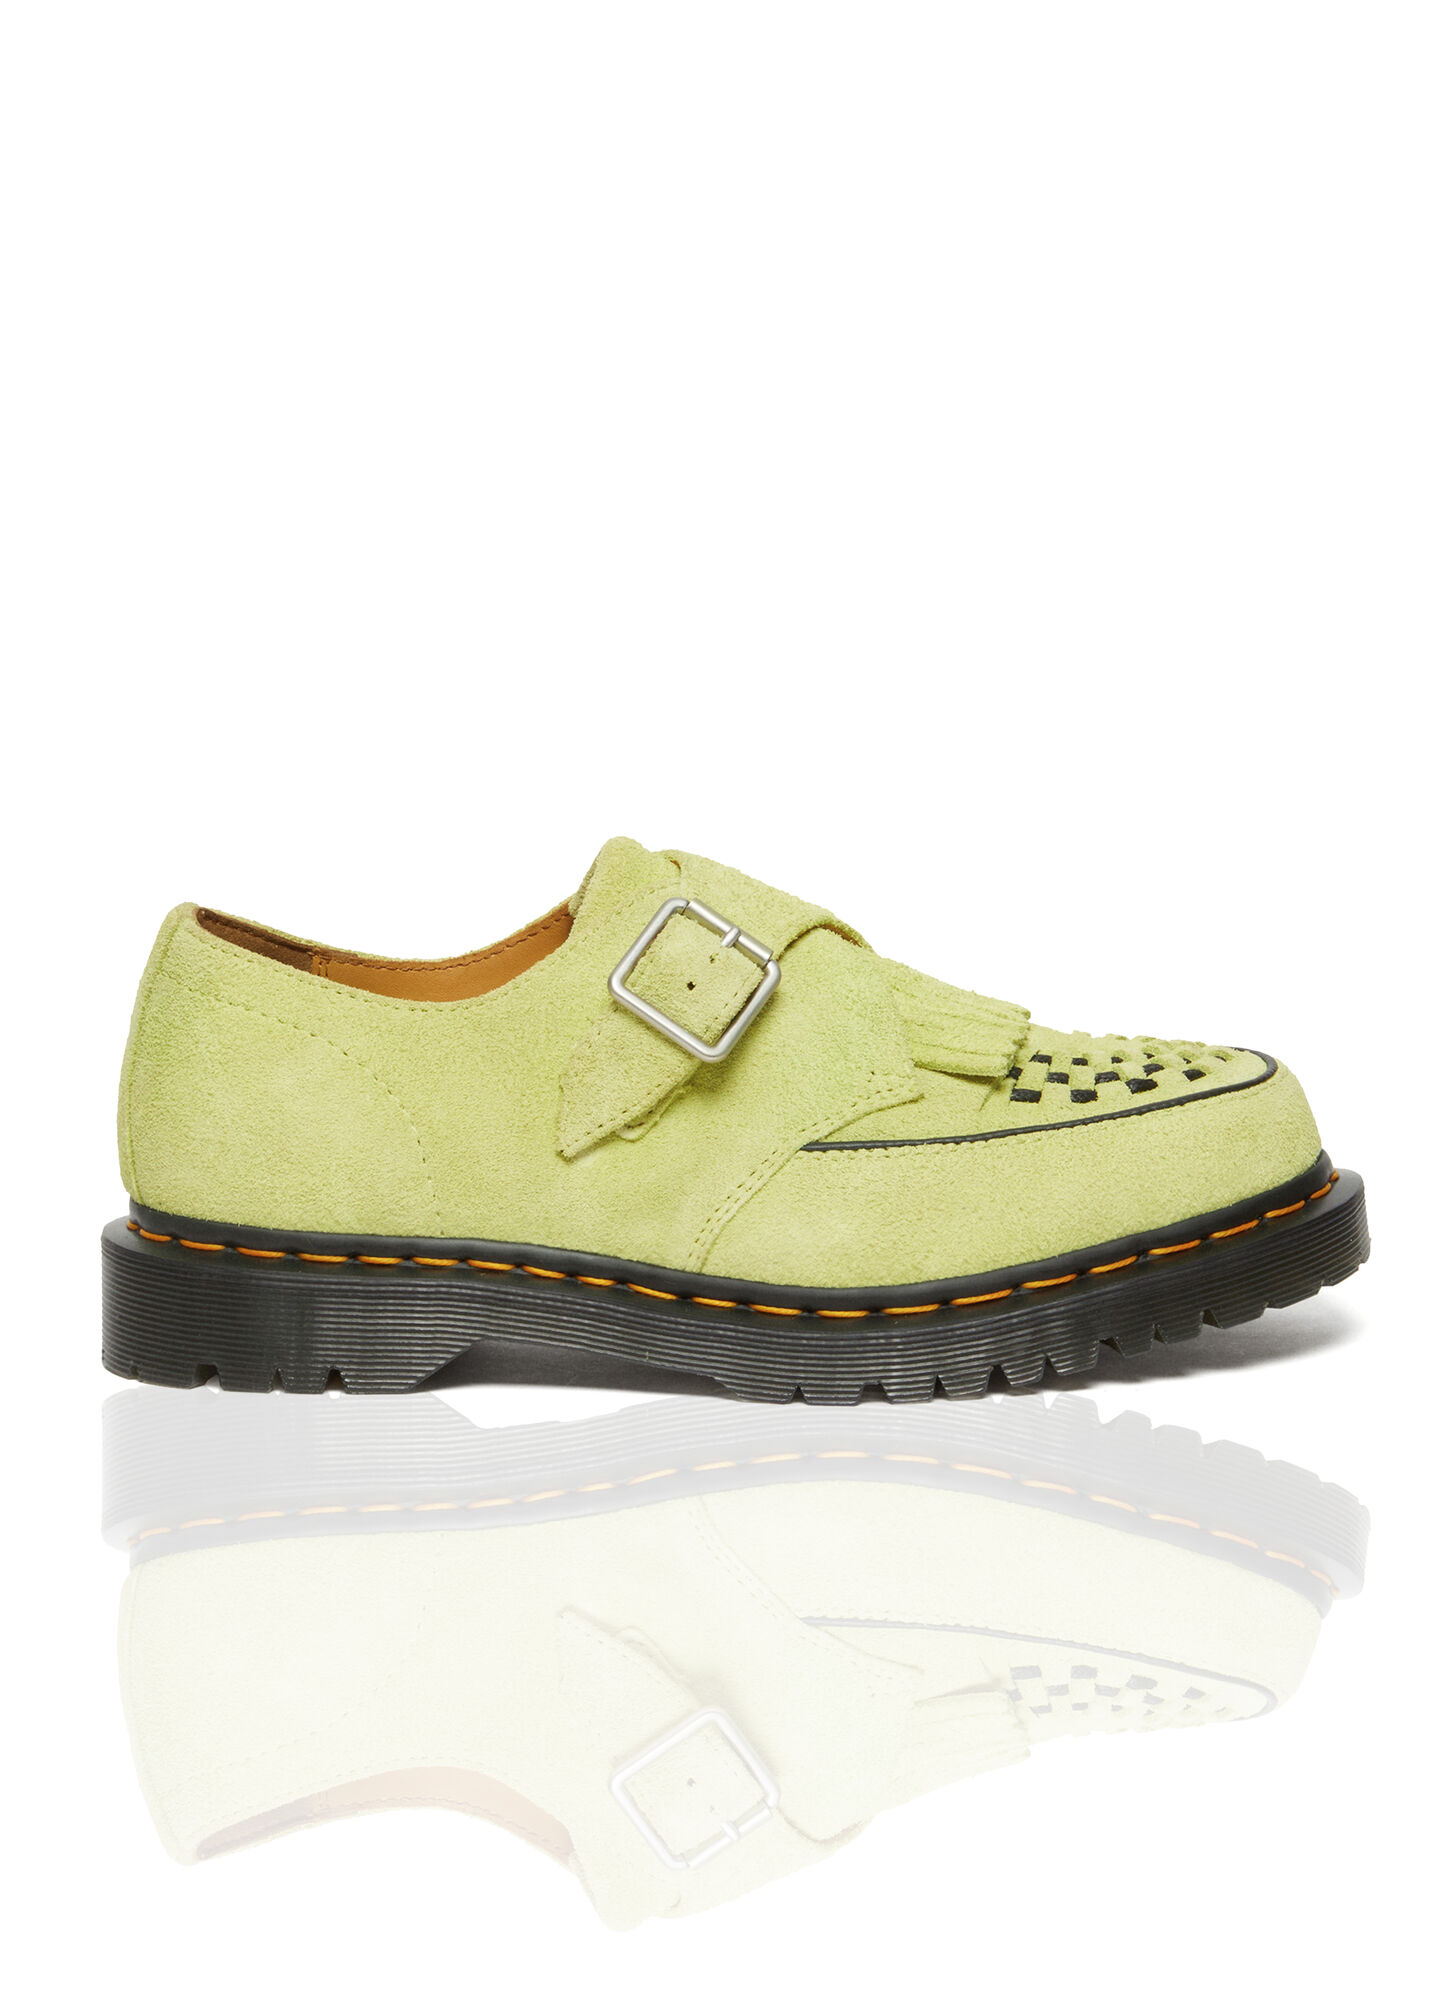 DR. MARTENS' THE RAMSEY MONK KILTIE CREEPER SHOES